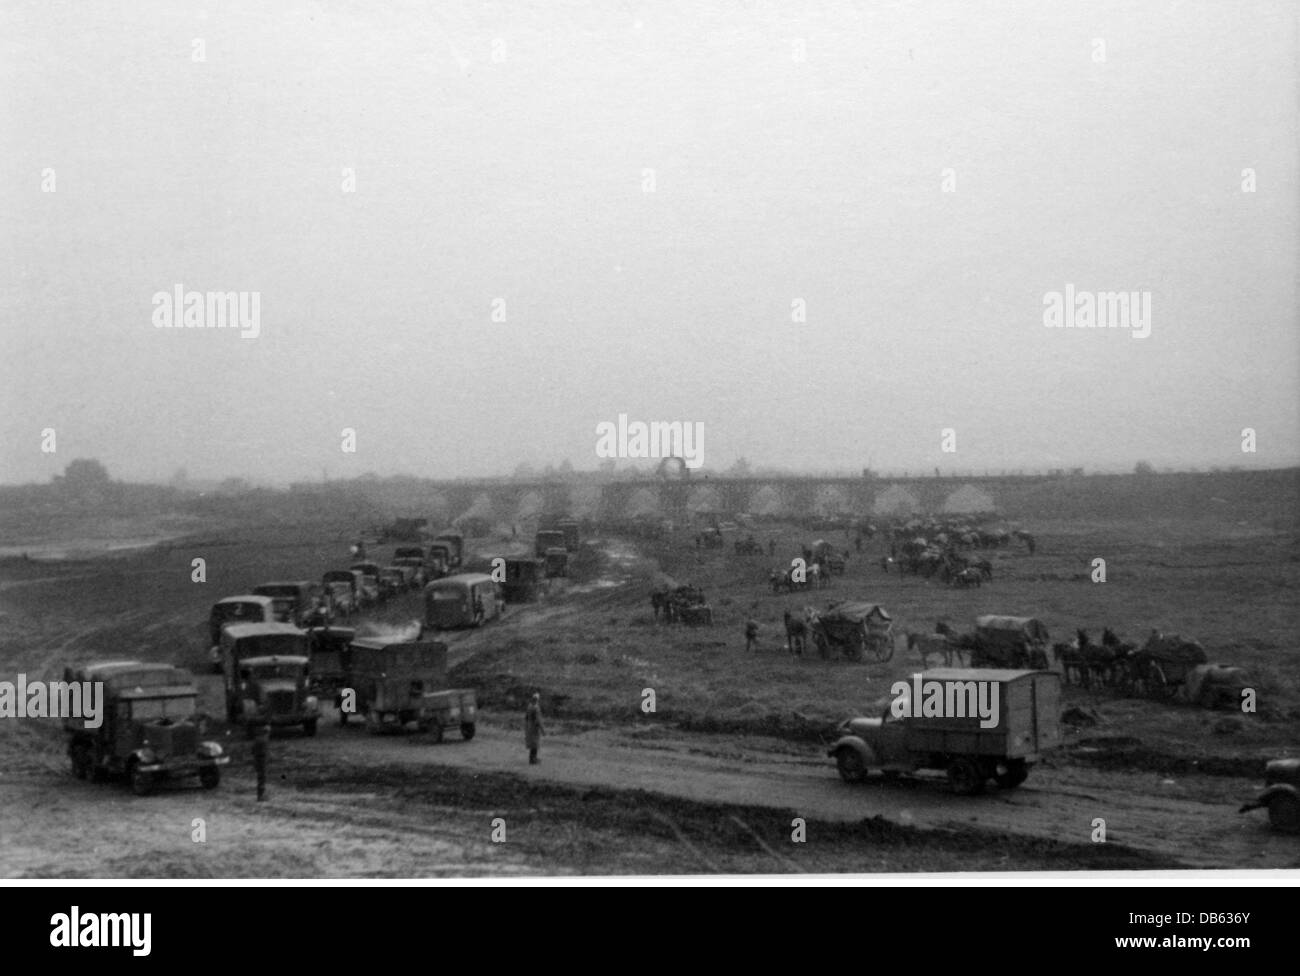 events, Second World War / WWII, Soviet Union, Operation 'Barbarossa' (German invasion of the Soviet Union), Wehrmacht convoy on a country road in the Ukraine, sector of Panzer Group Kleist, Army Group South, summer 1941, Additional-Rights-Clearences-Not Available Stock Photo